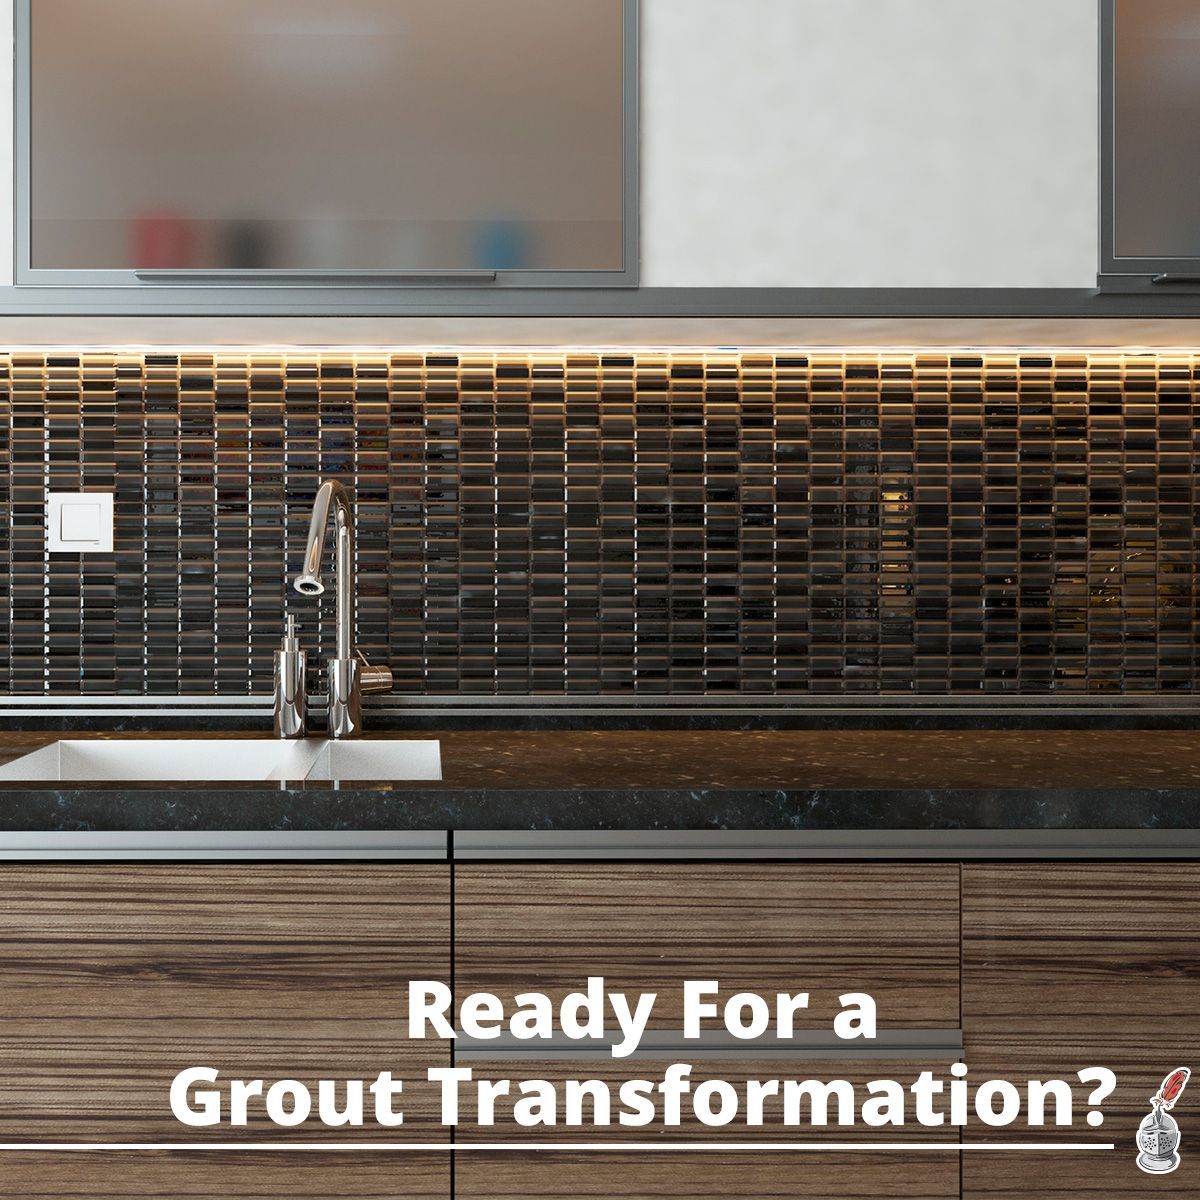 Ready For a Grout Transformation?